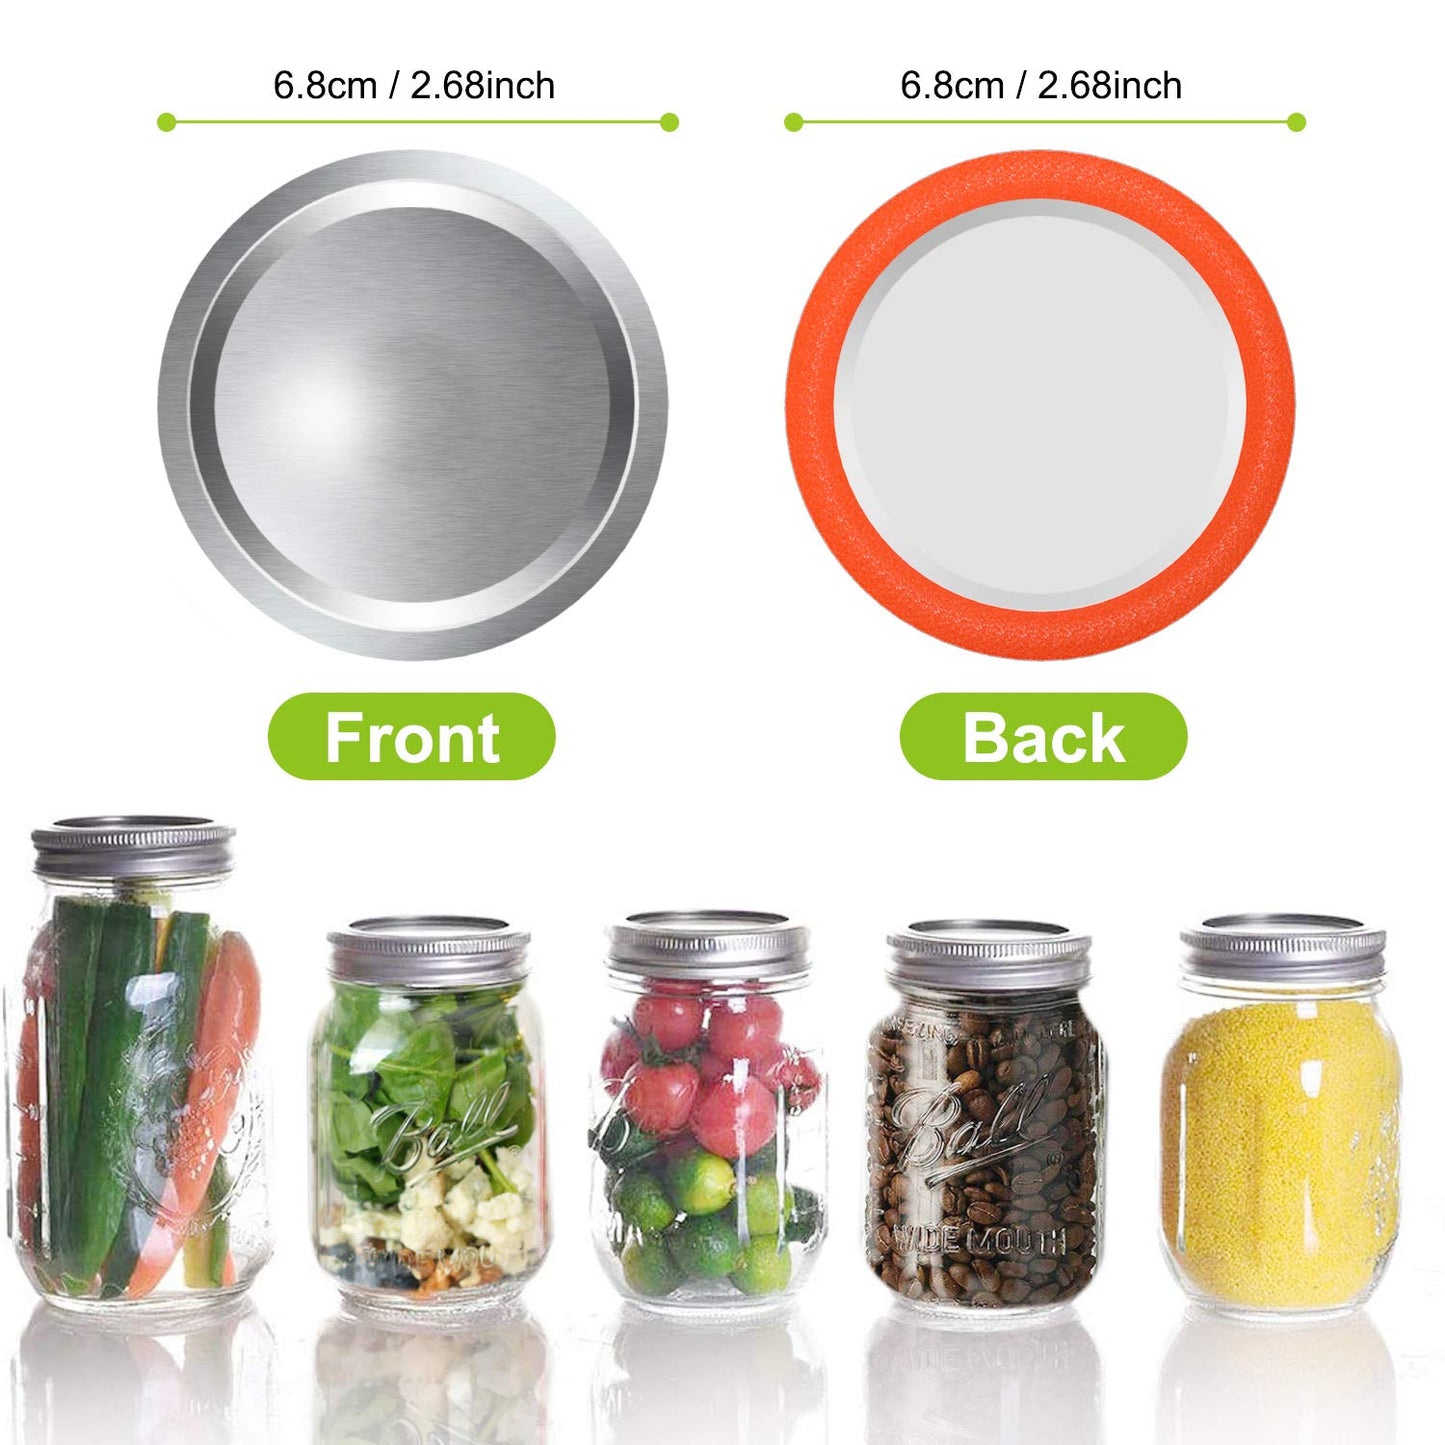 Mason Jar Lids Regular Mouth Canning Lids for Ball, Kerr Jars - 24-Count Split-Type with Leak proof & Airtight Seal Features, Metal Mason Jar Lids for Canning - Food Grade Material, Silver/70 MM